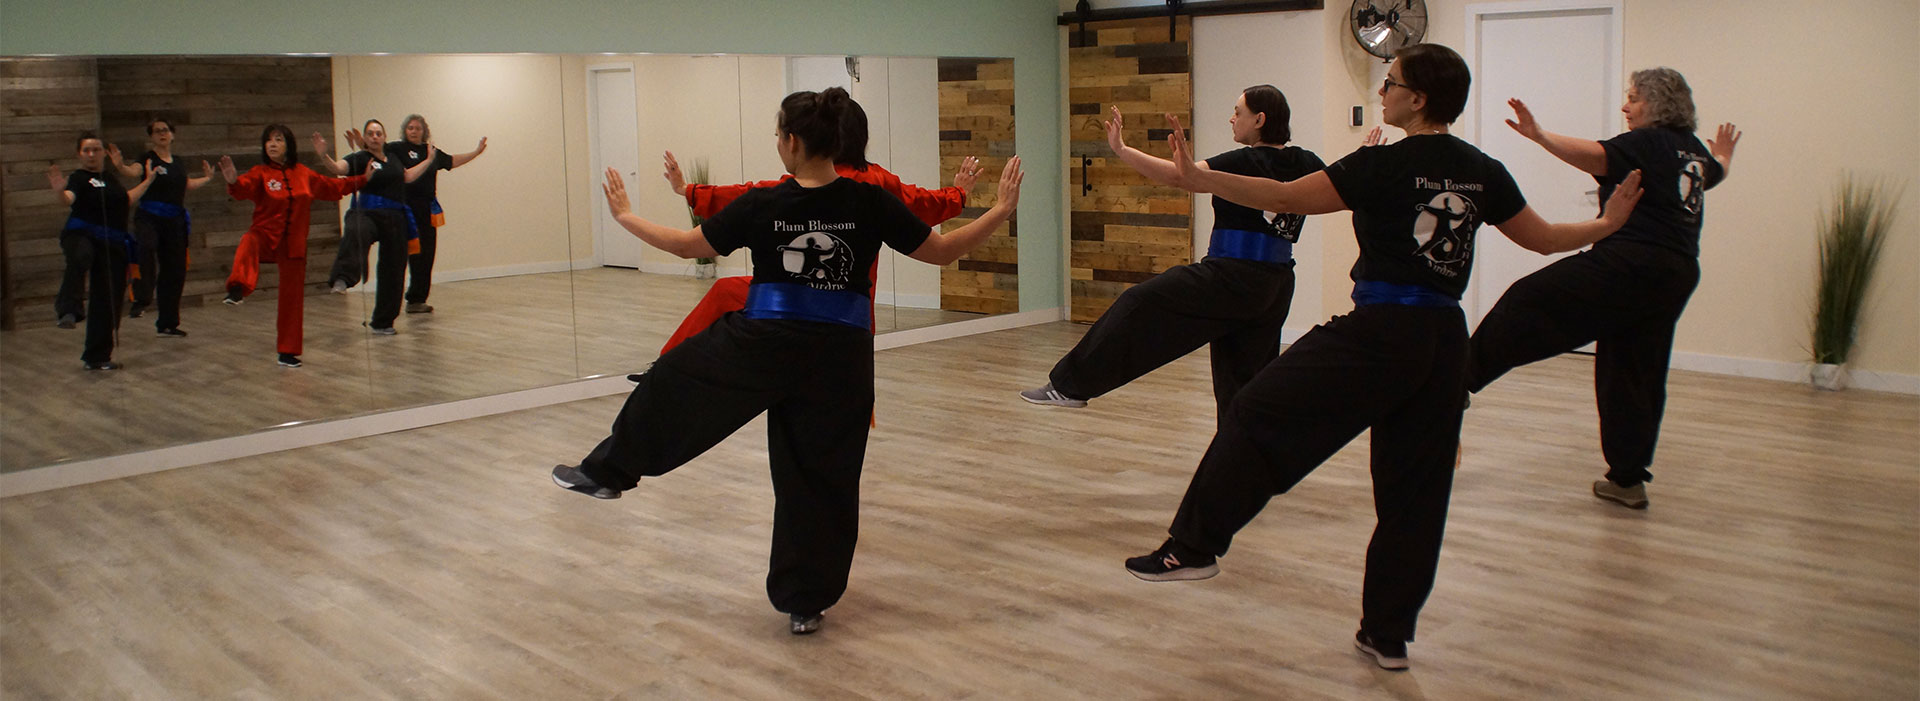 Plum Blossom Tai Chi in Airdrie is proud to present a few photos of our students hard at work!